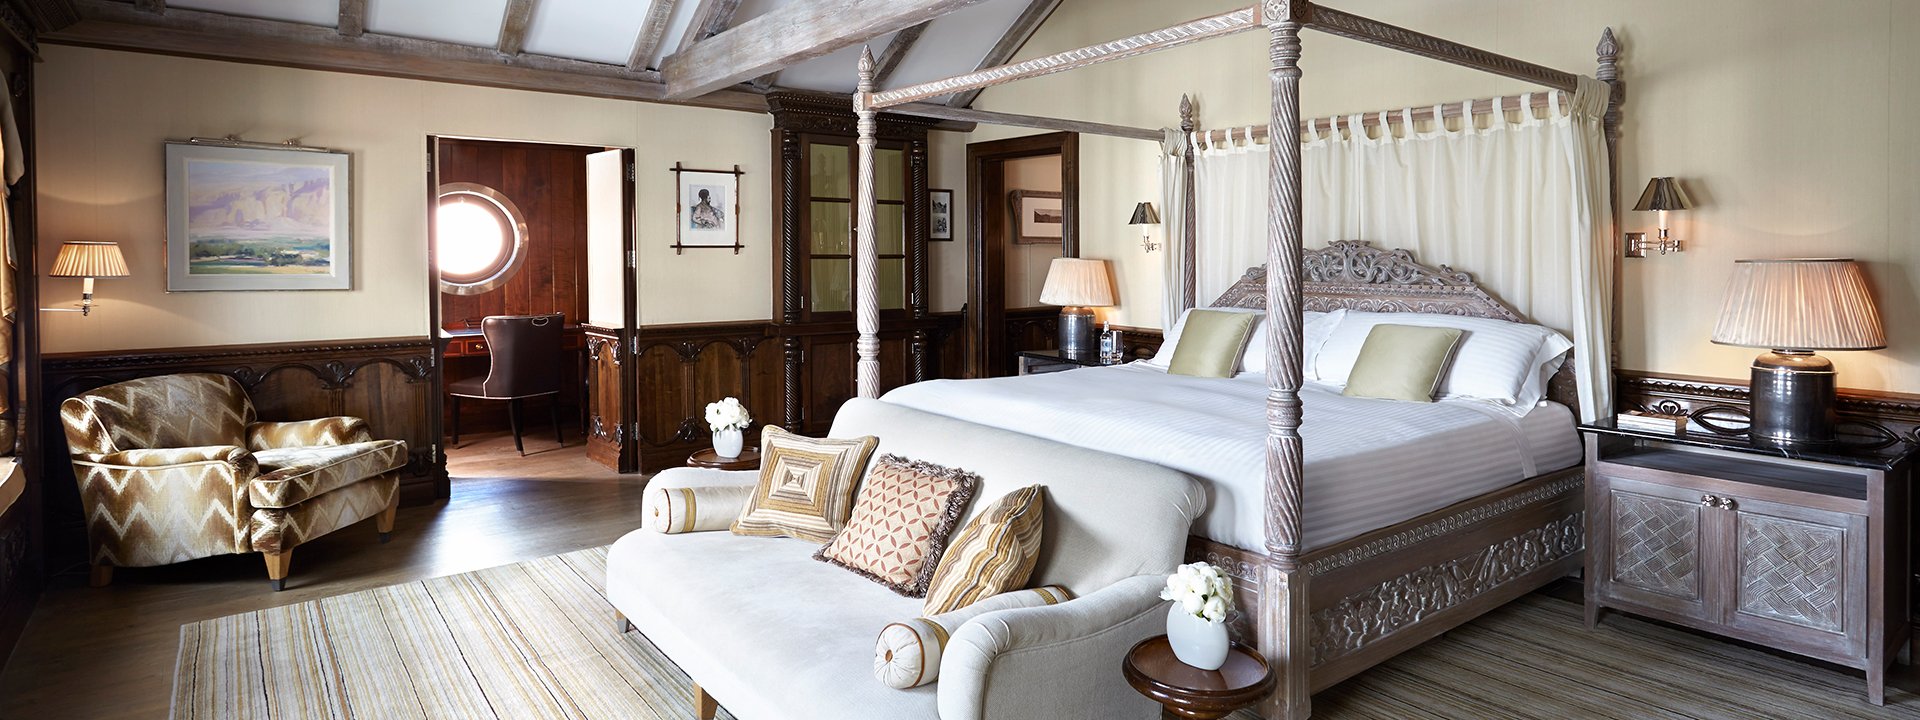 A four poster King Bed in the prince's lodge suite.